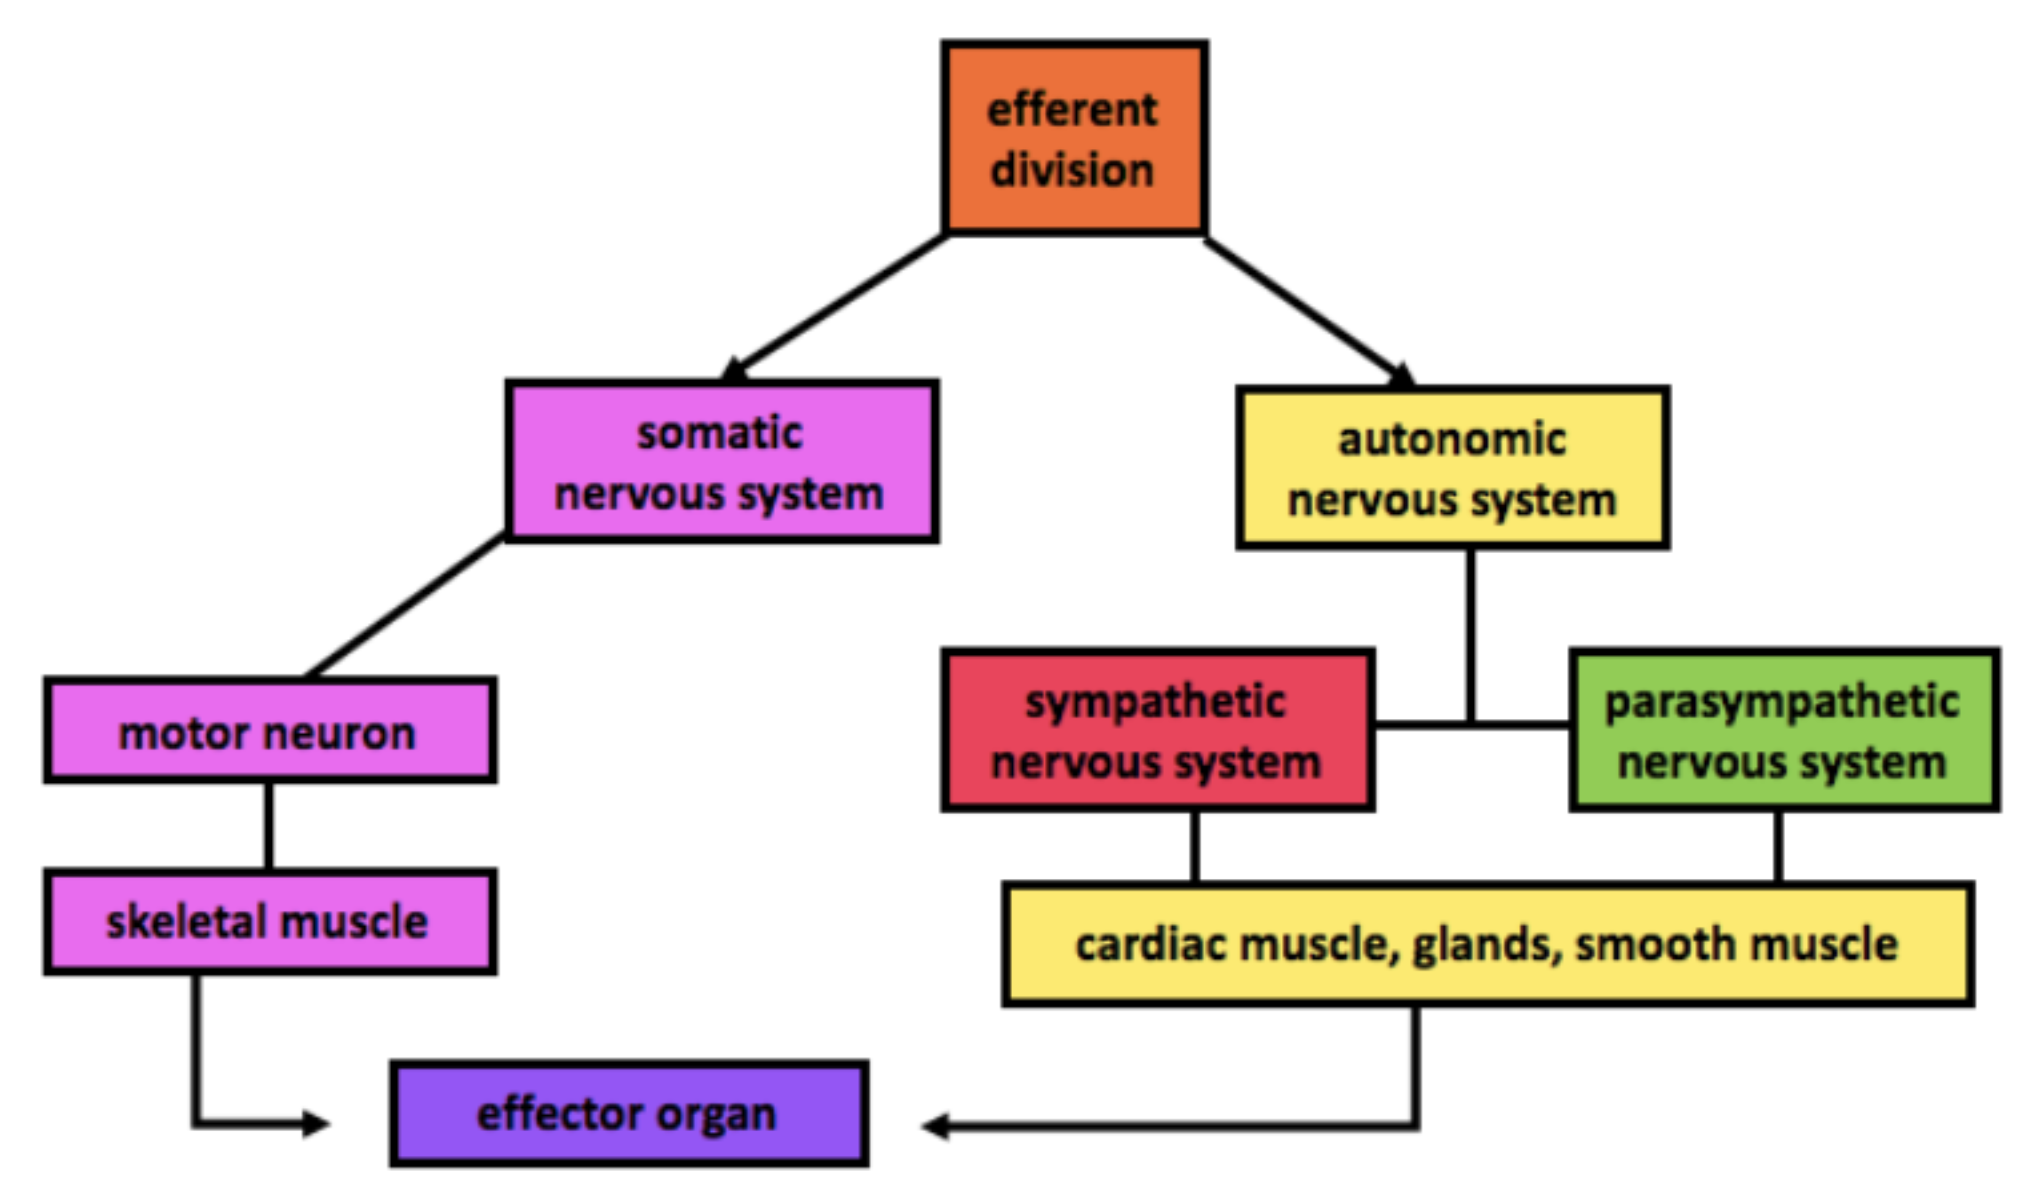 examples of somatic nervous system